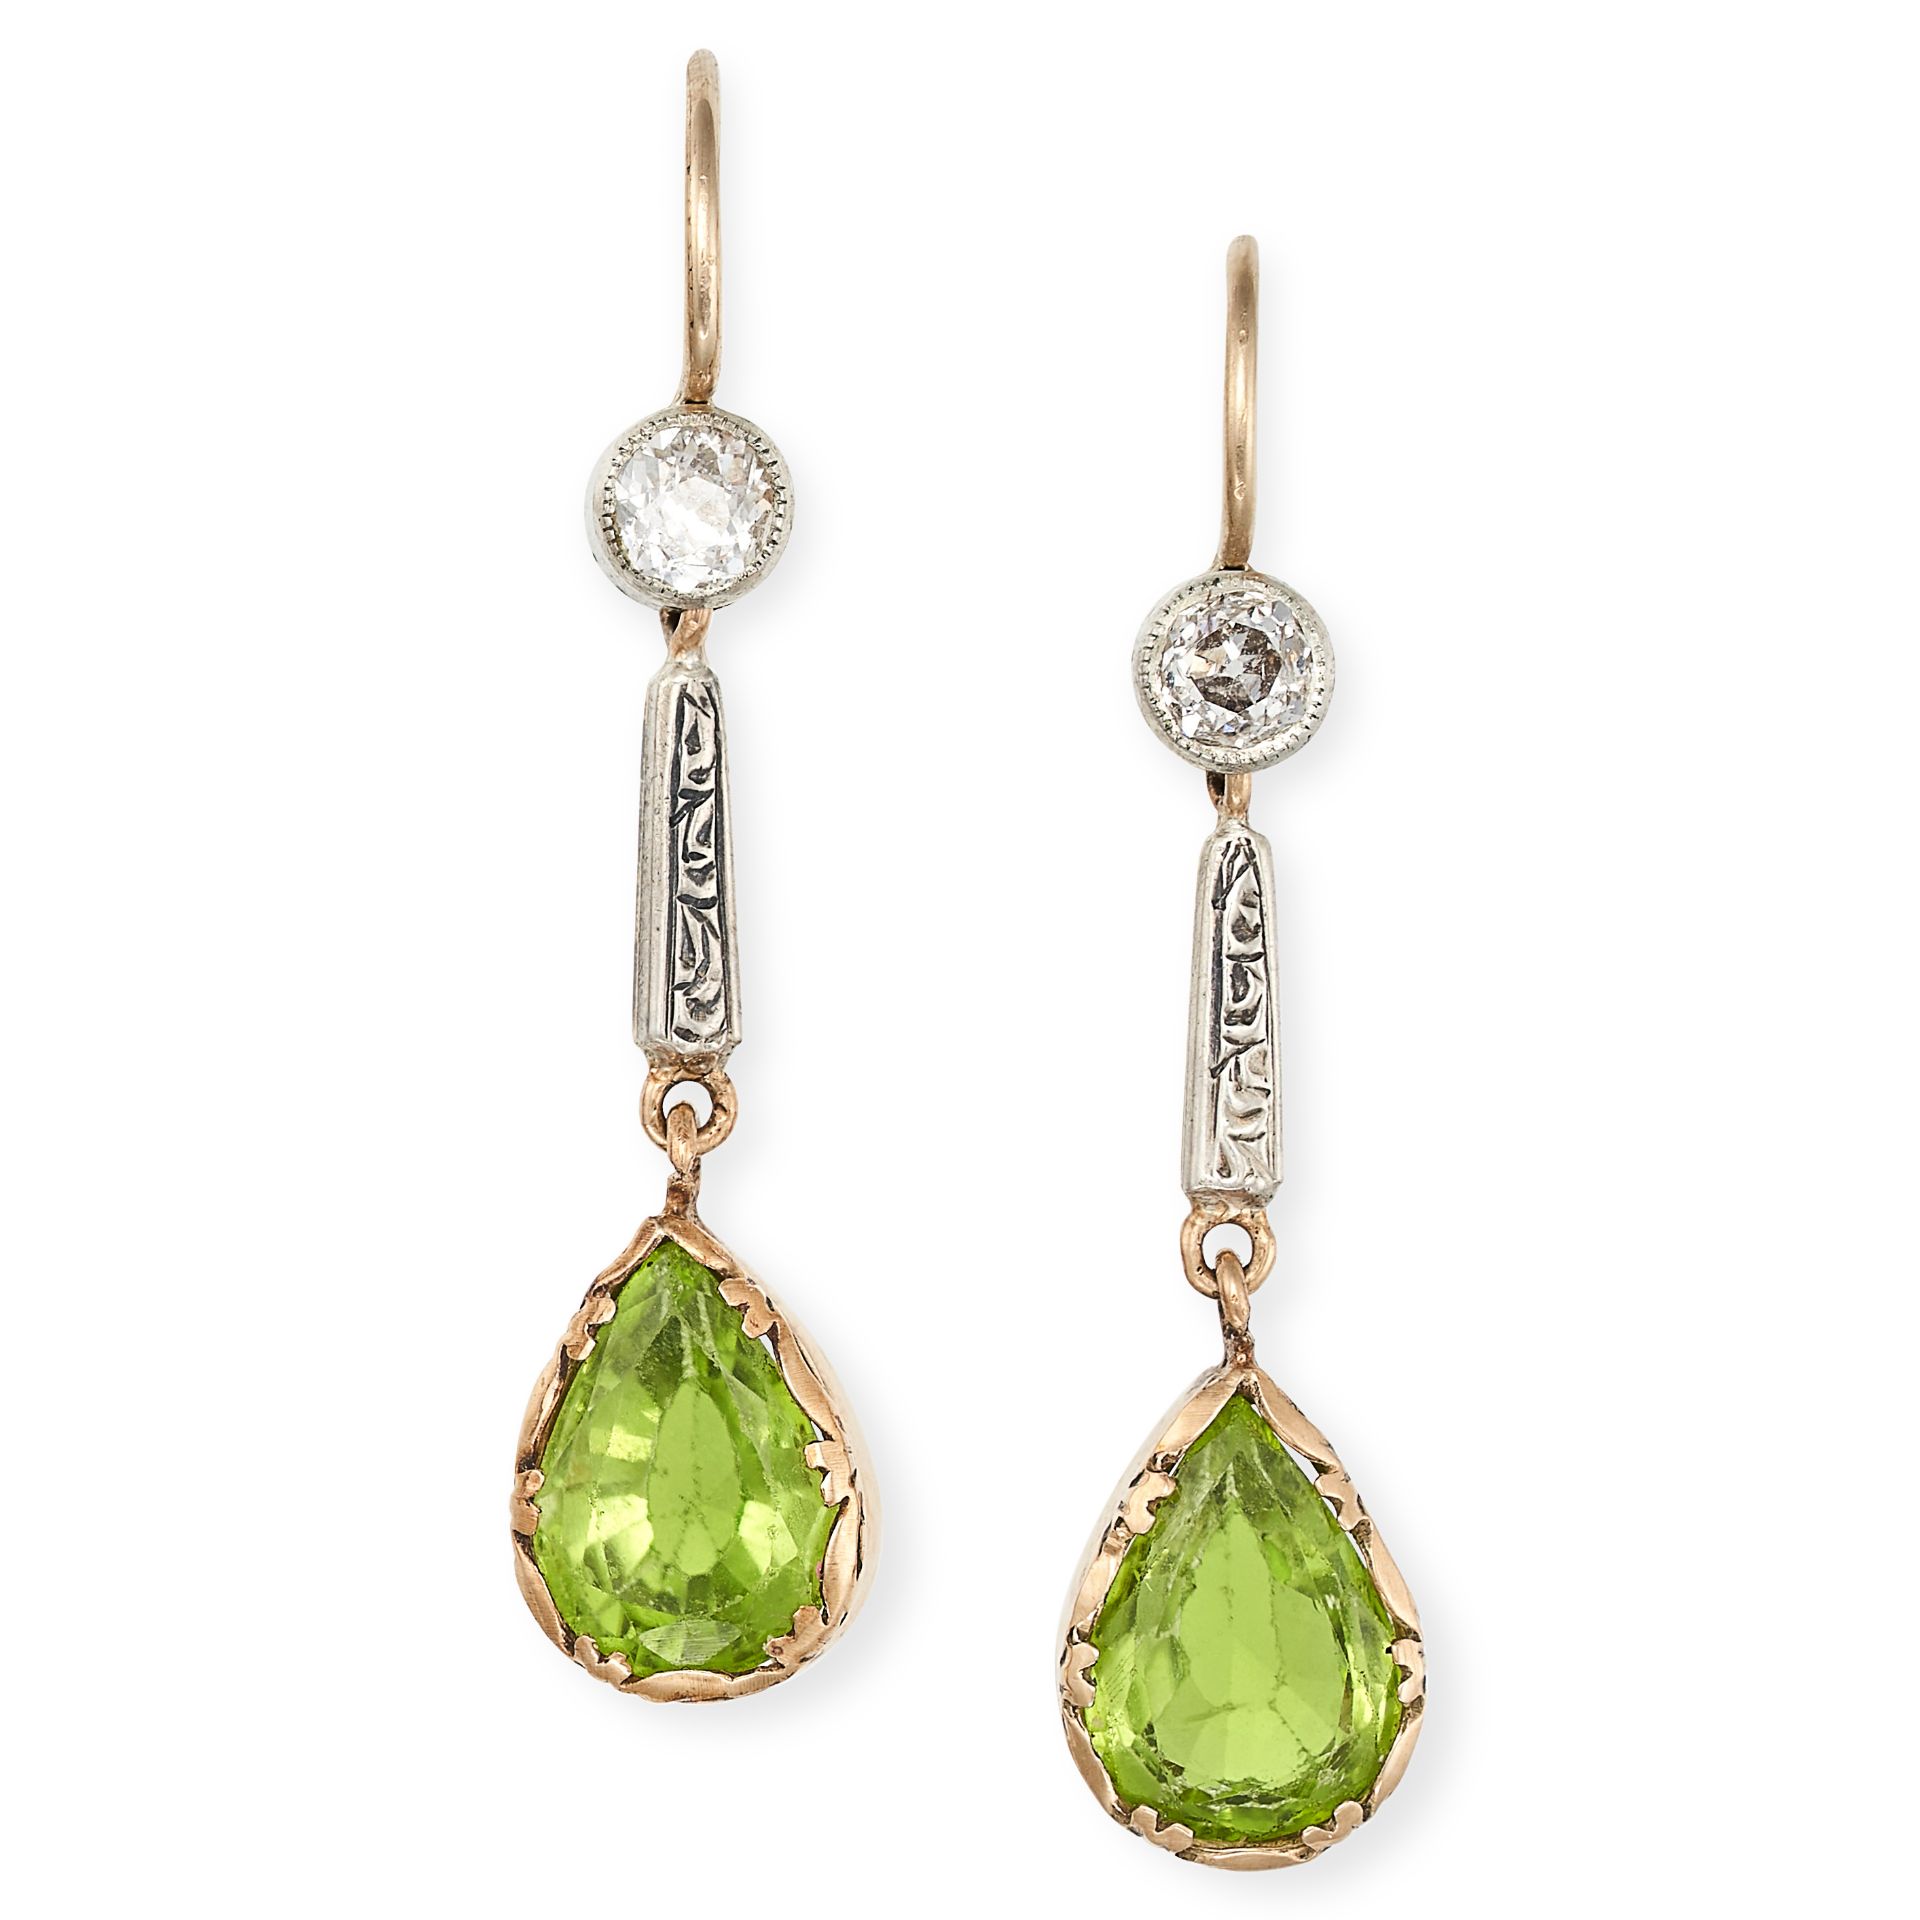 A PAIR OF ANTIQUE PERIDOT AND DIAMOND DROP EARRINGS, EARLY 20TH CENTURY in yellow gold, each comp...